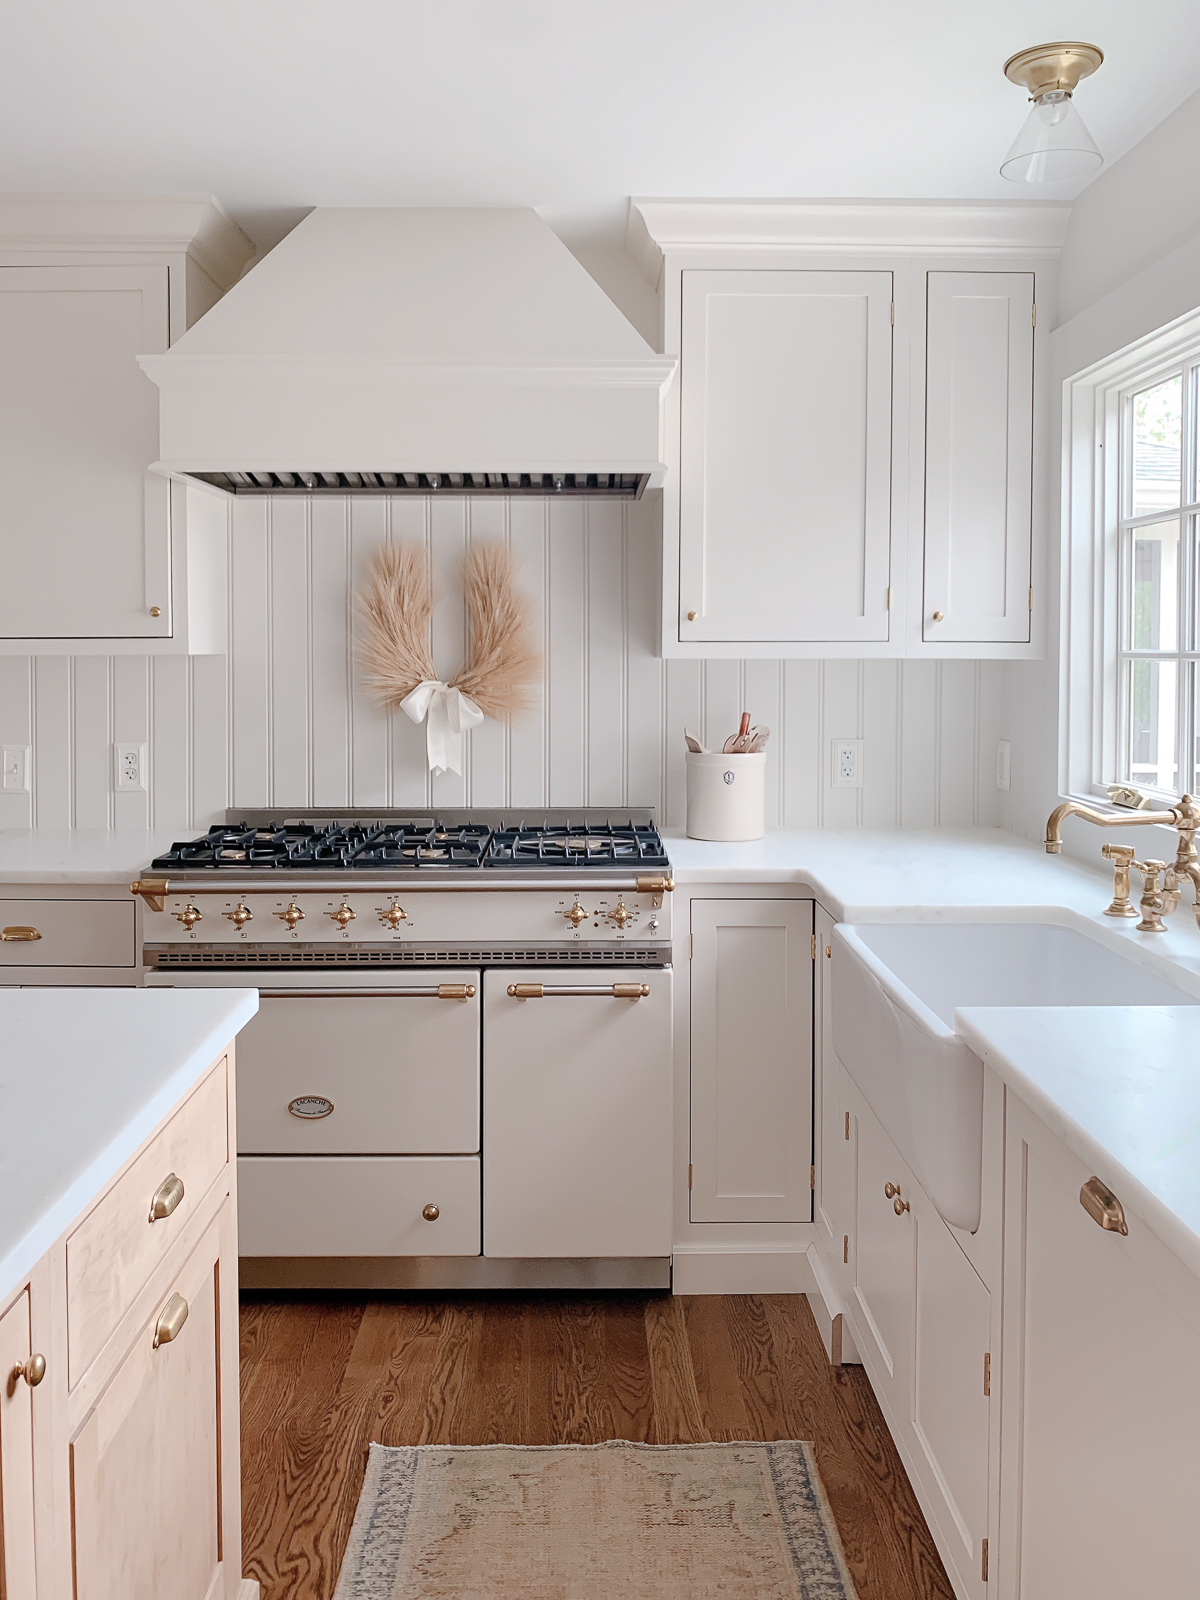 A white kitchen with wood floors and a stove perfect for hosting Thanksgiving.